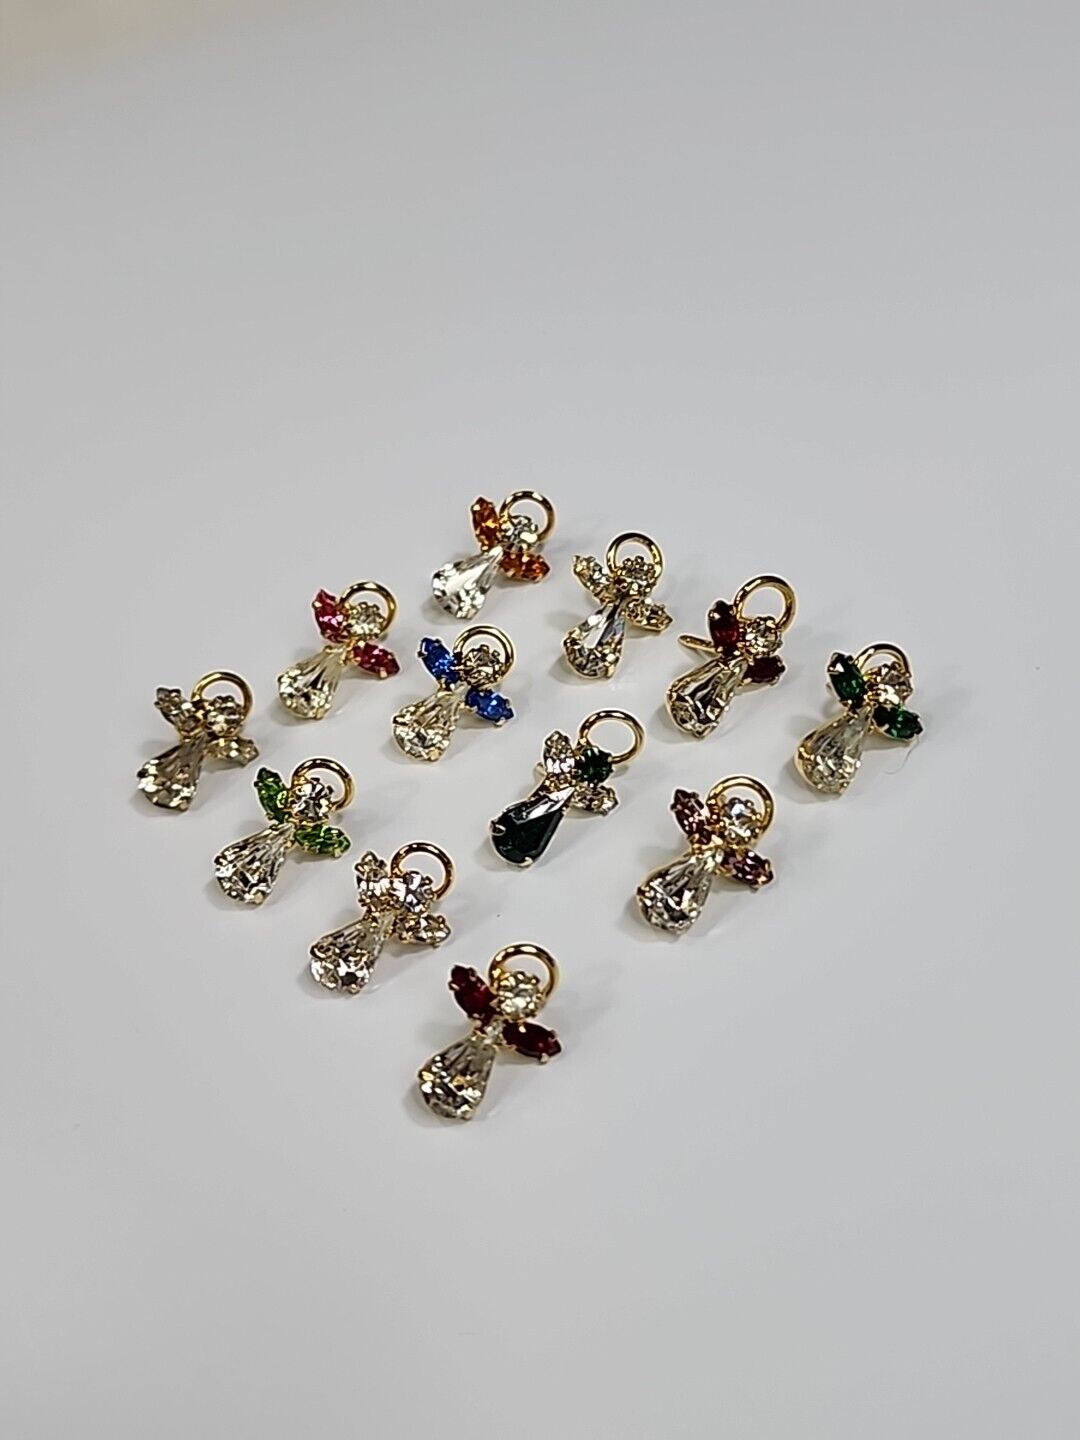 Assorted Sparkly Guardian Angel Lapel Pin Lot Of 12 W/Faux Gems - Group 1